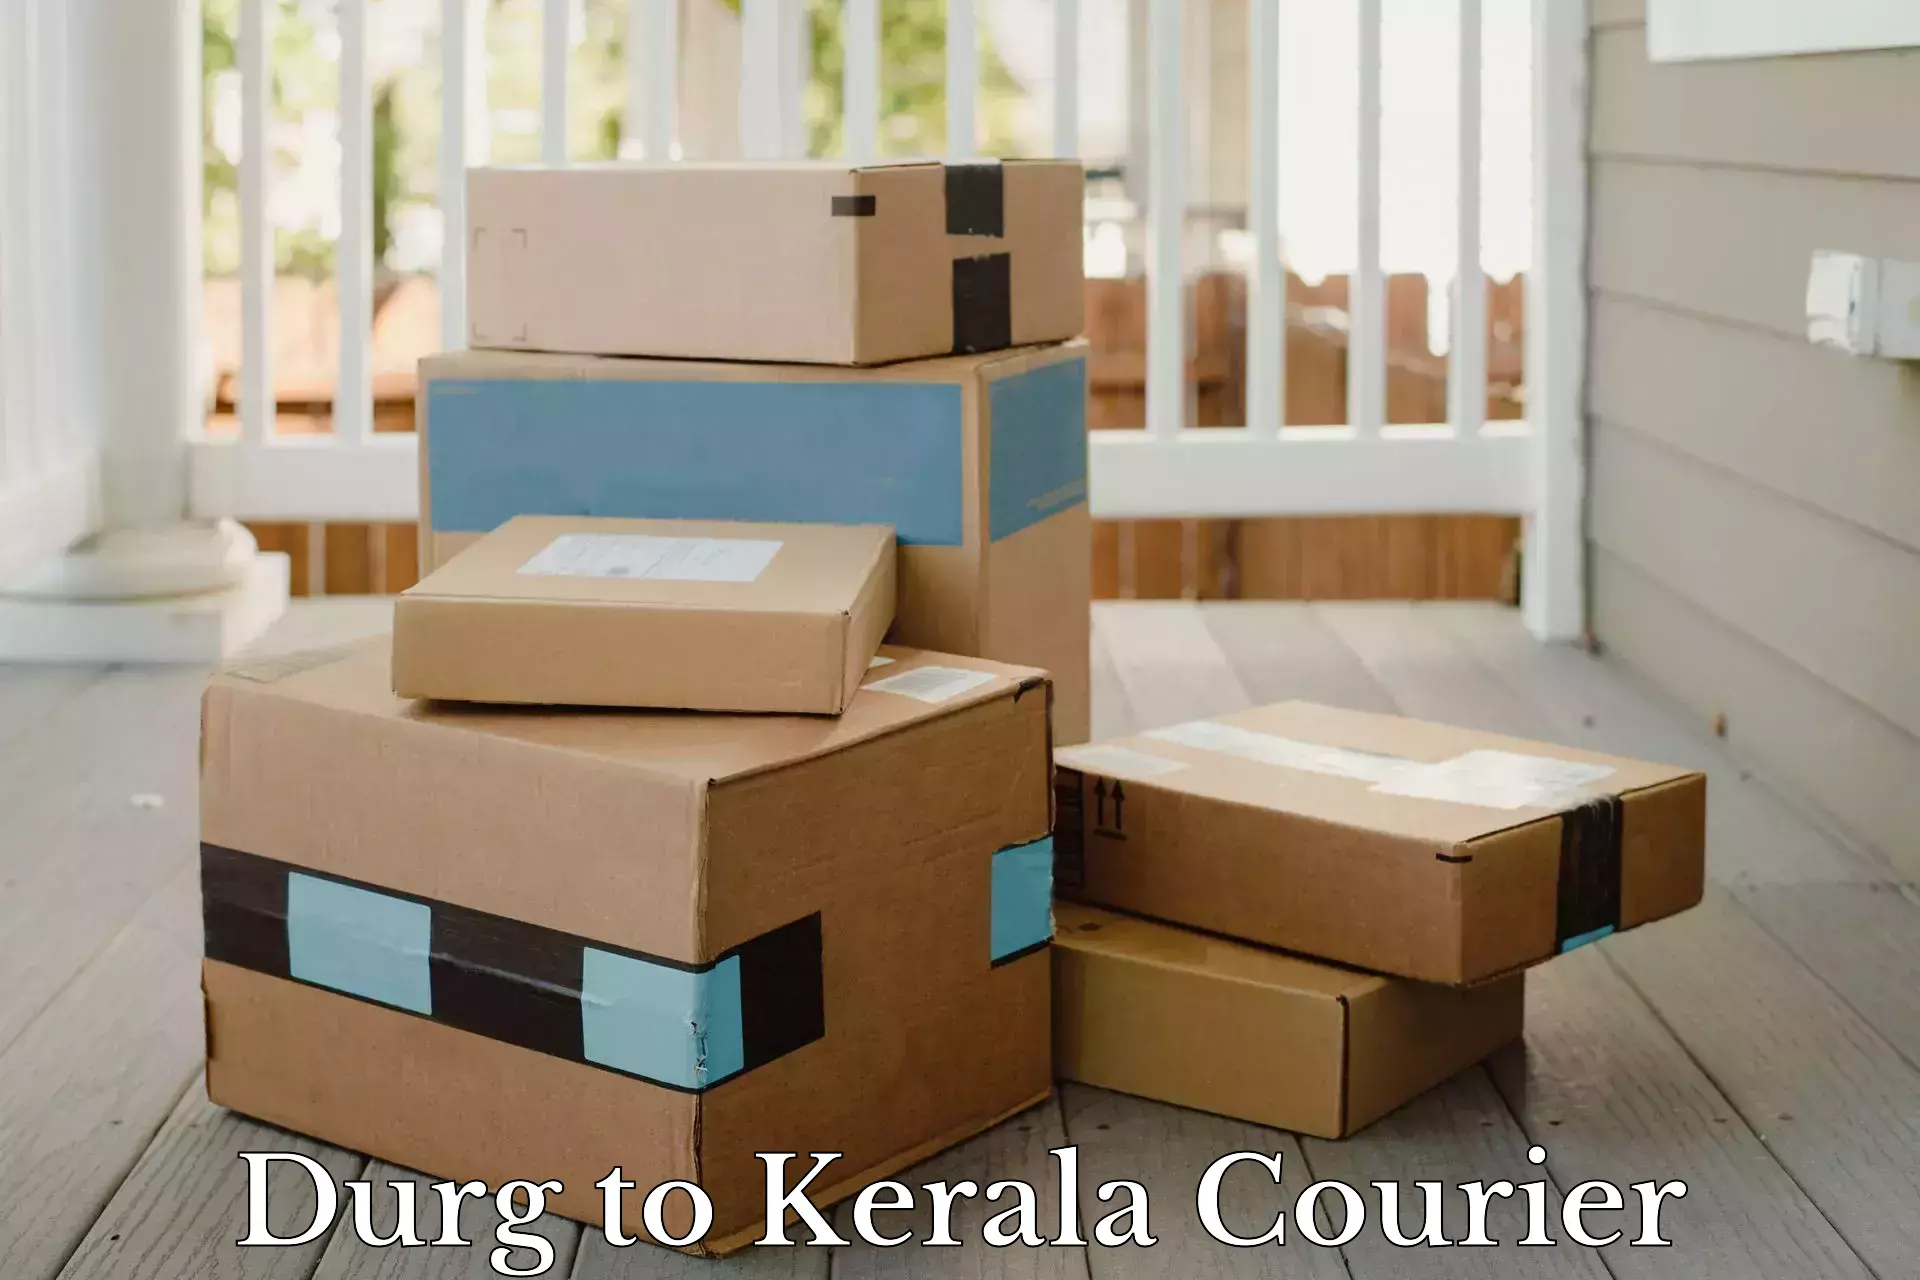 Parcel service for businesses Durg to Pathanamthitta